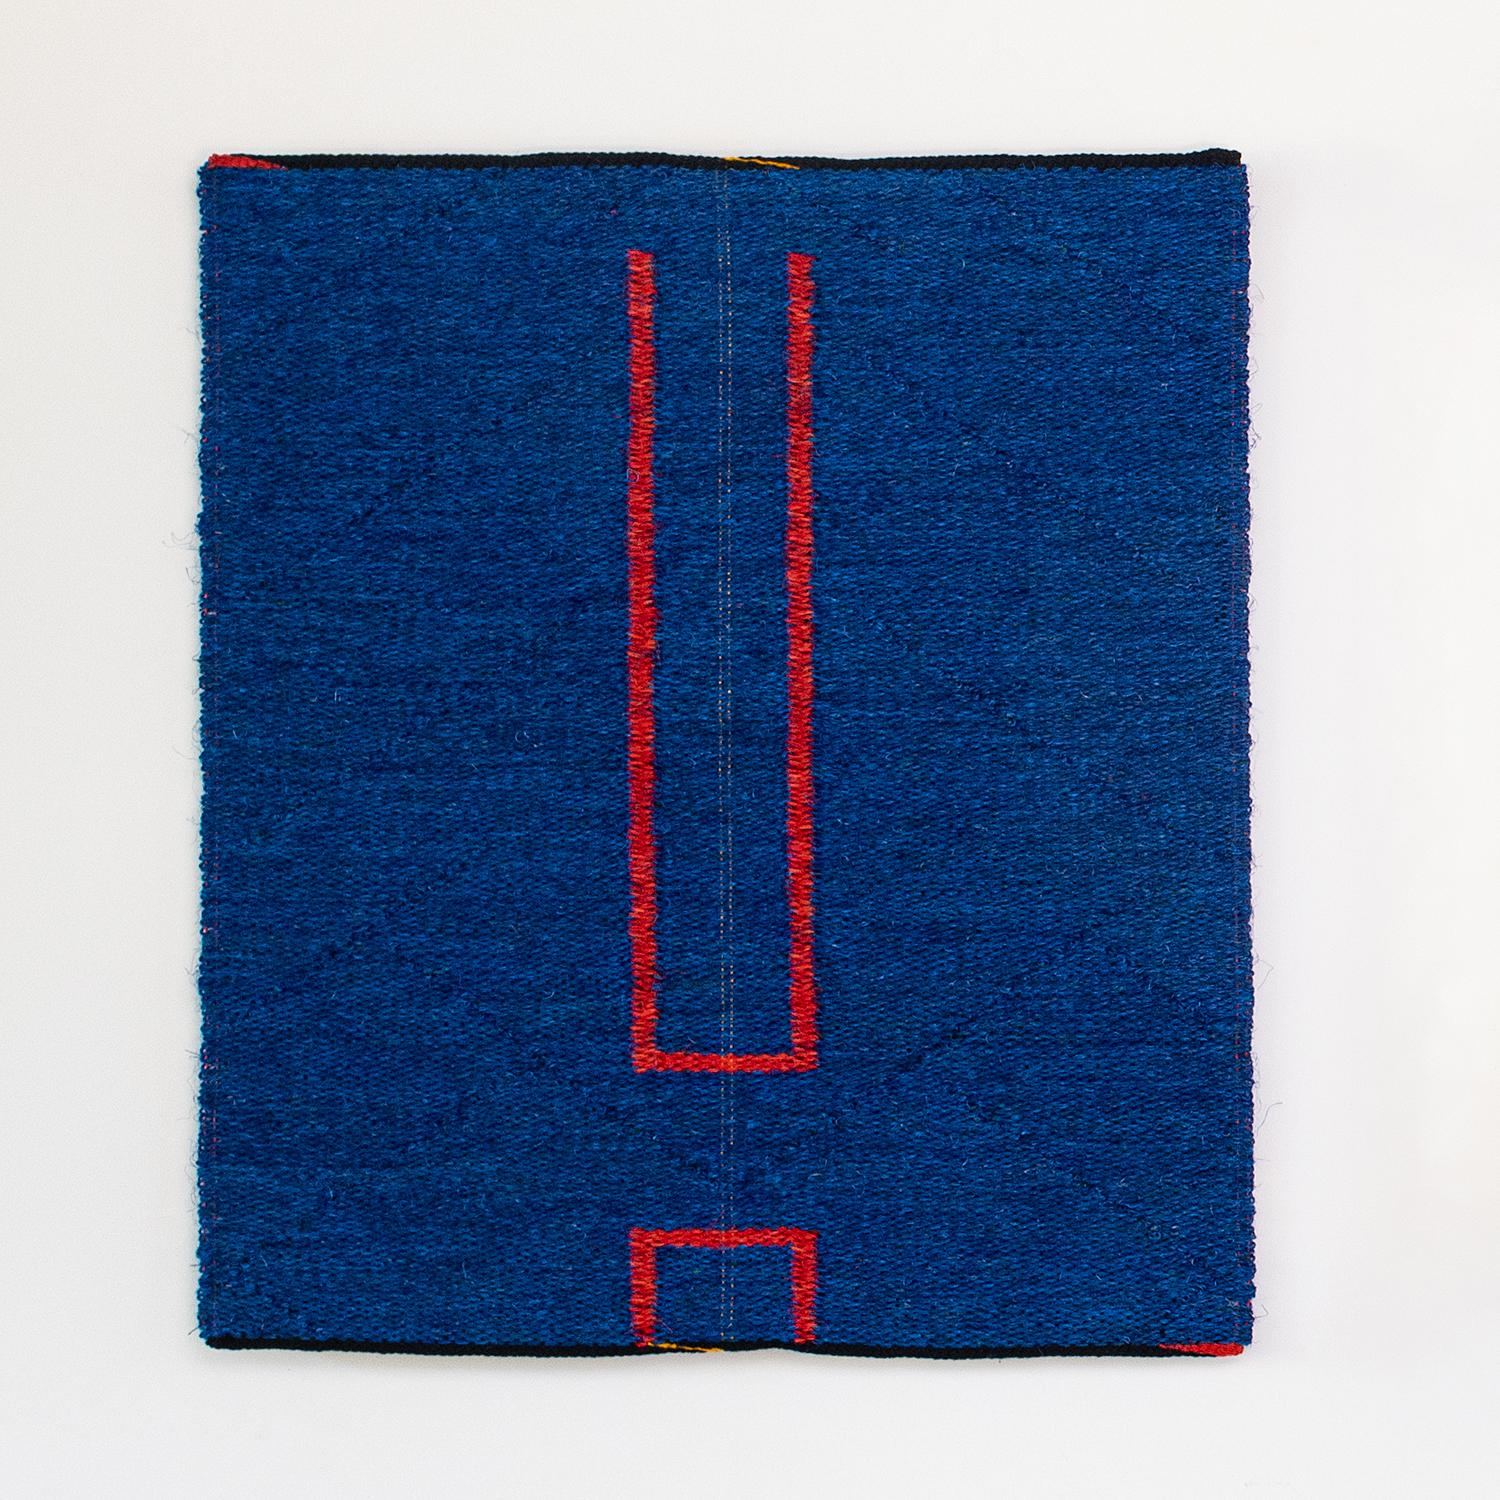 Into Blue, Gudrun Pagter, Abstract geometric tapestry